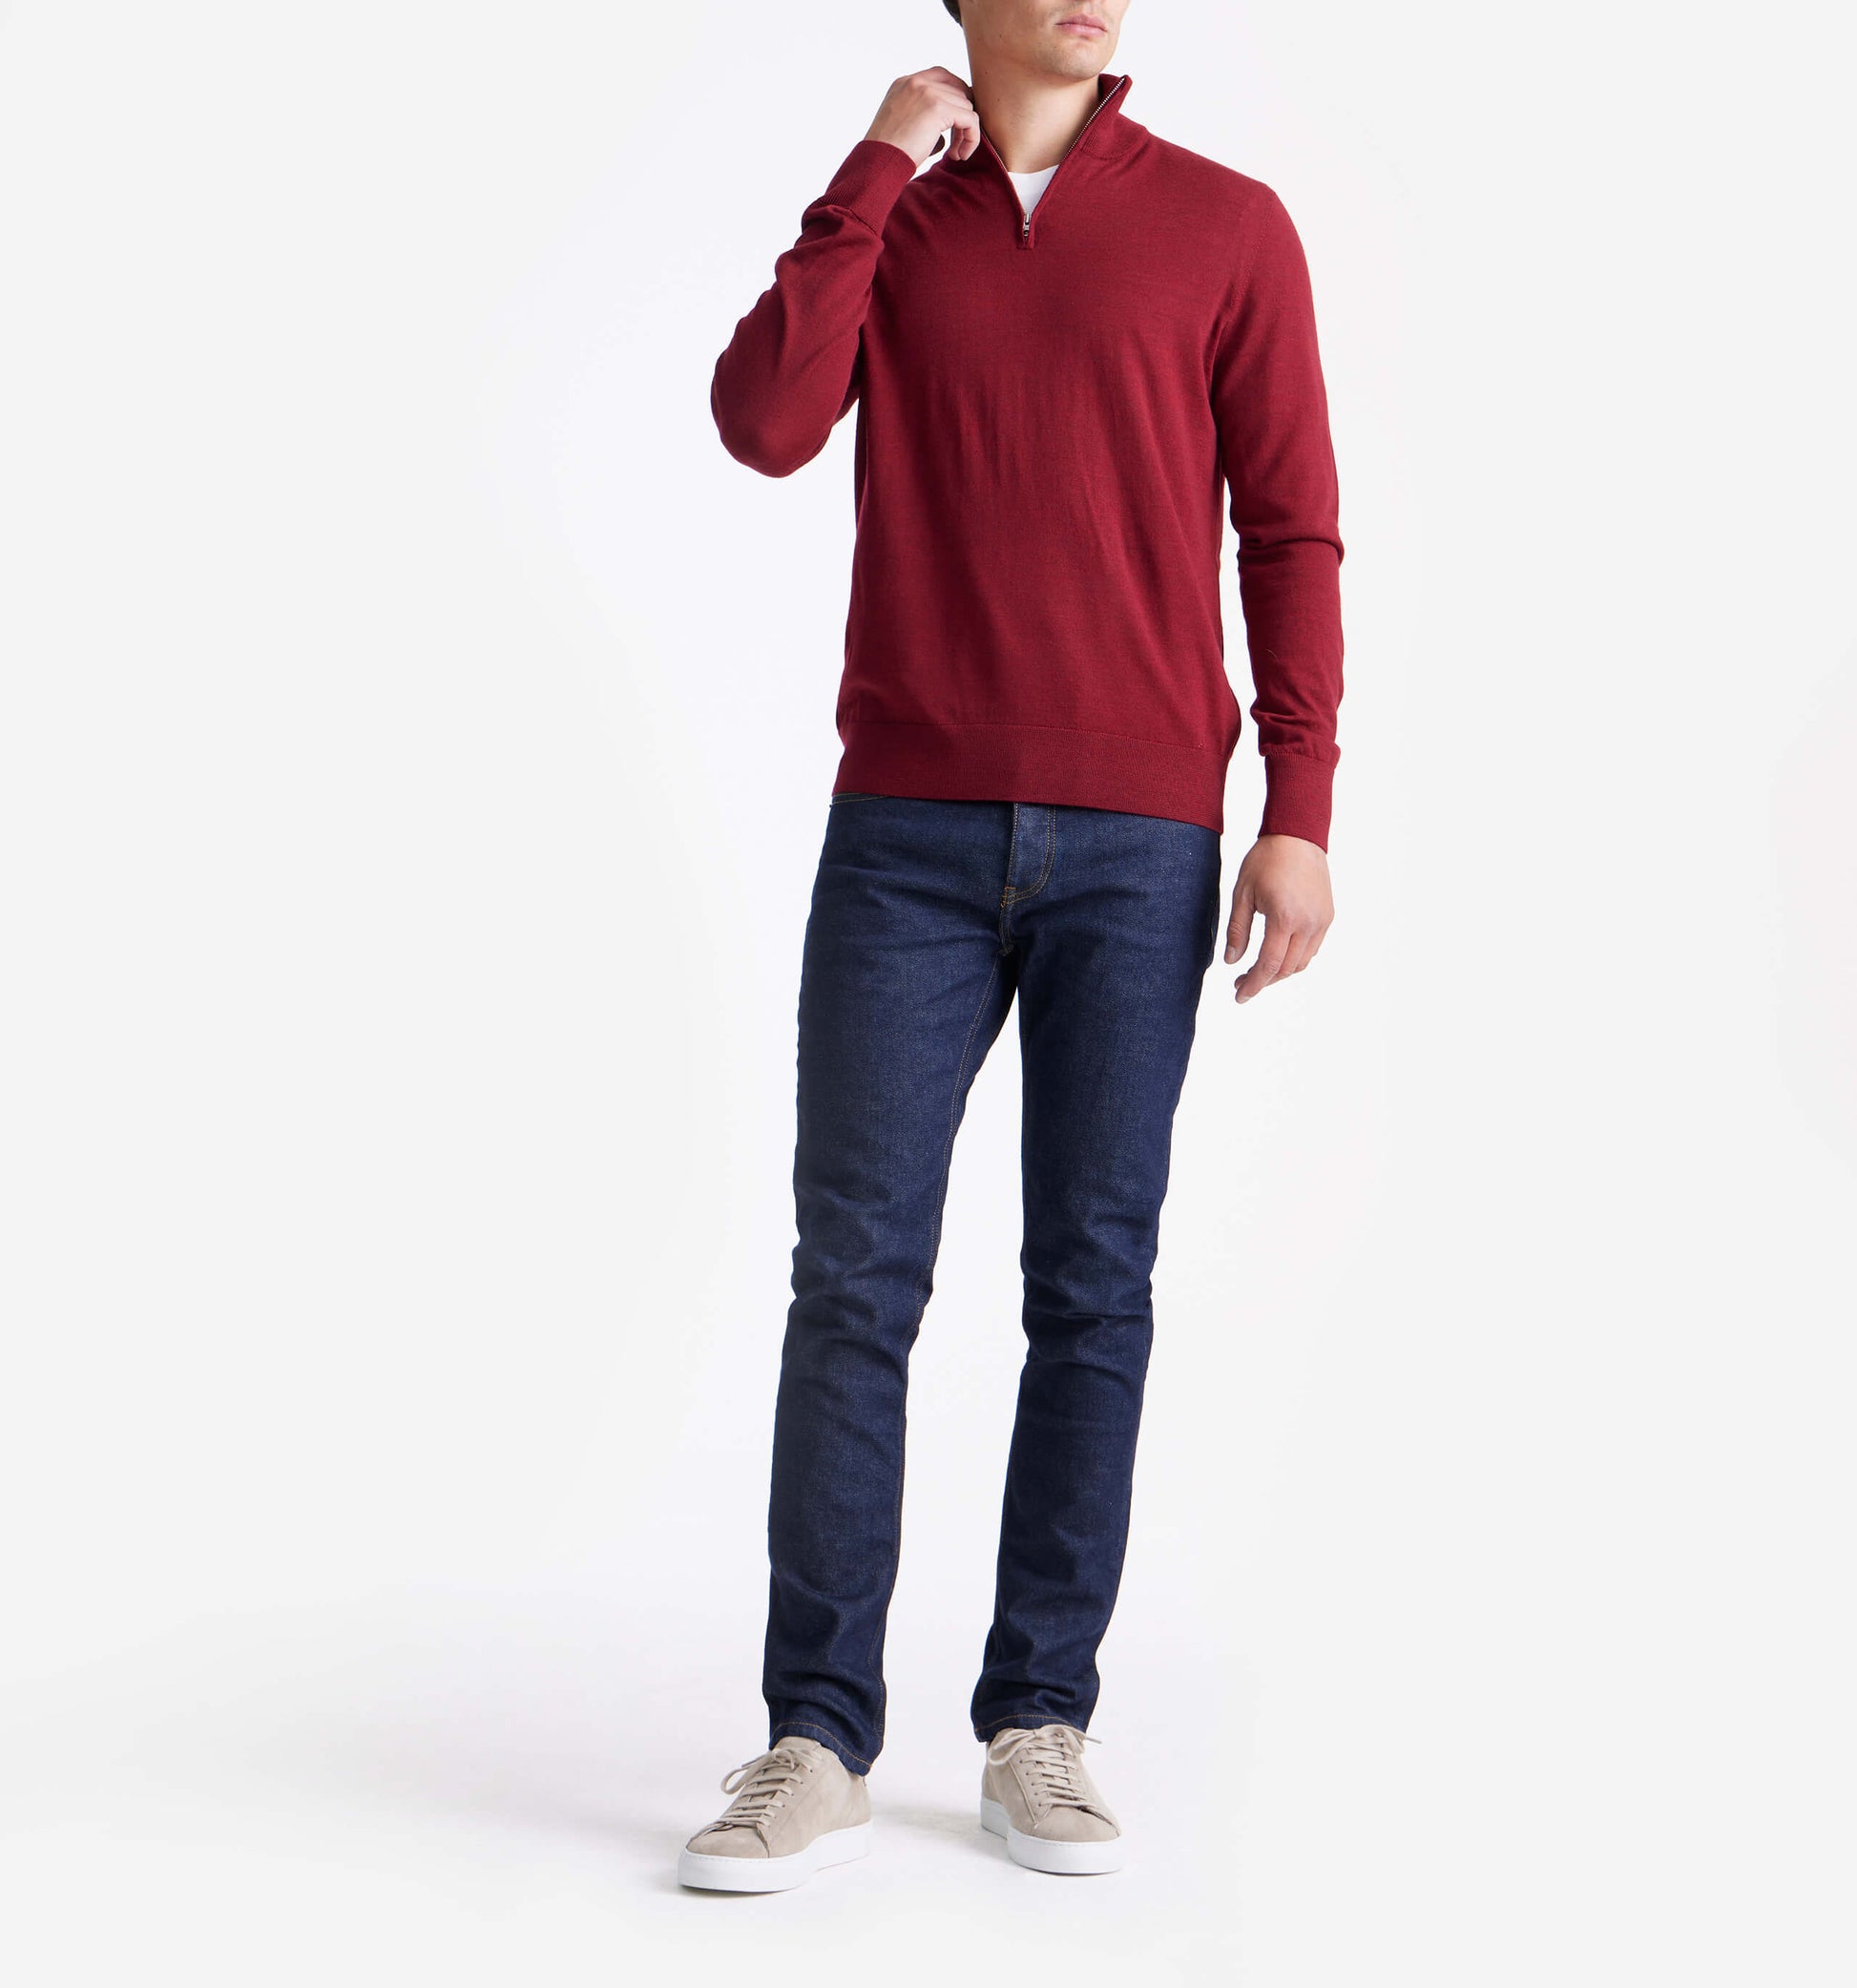 The Michael - Merino Wool Zip Mock In Red From King Essentials